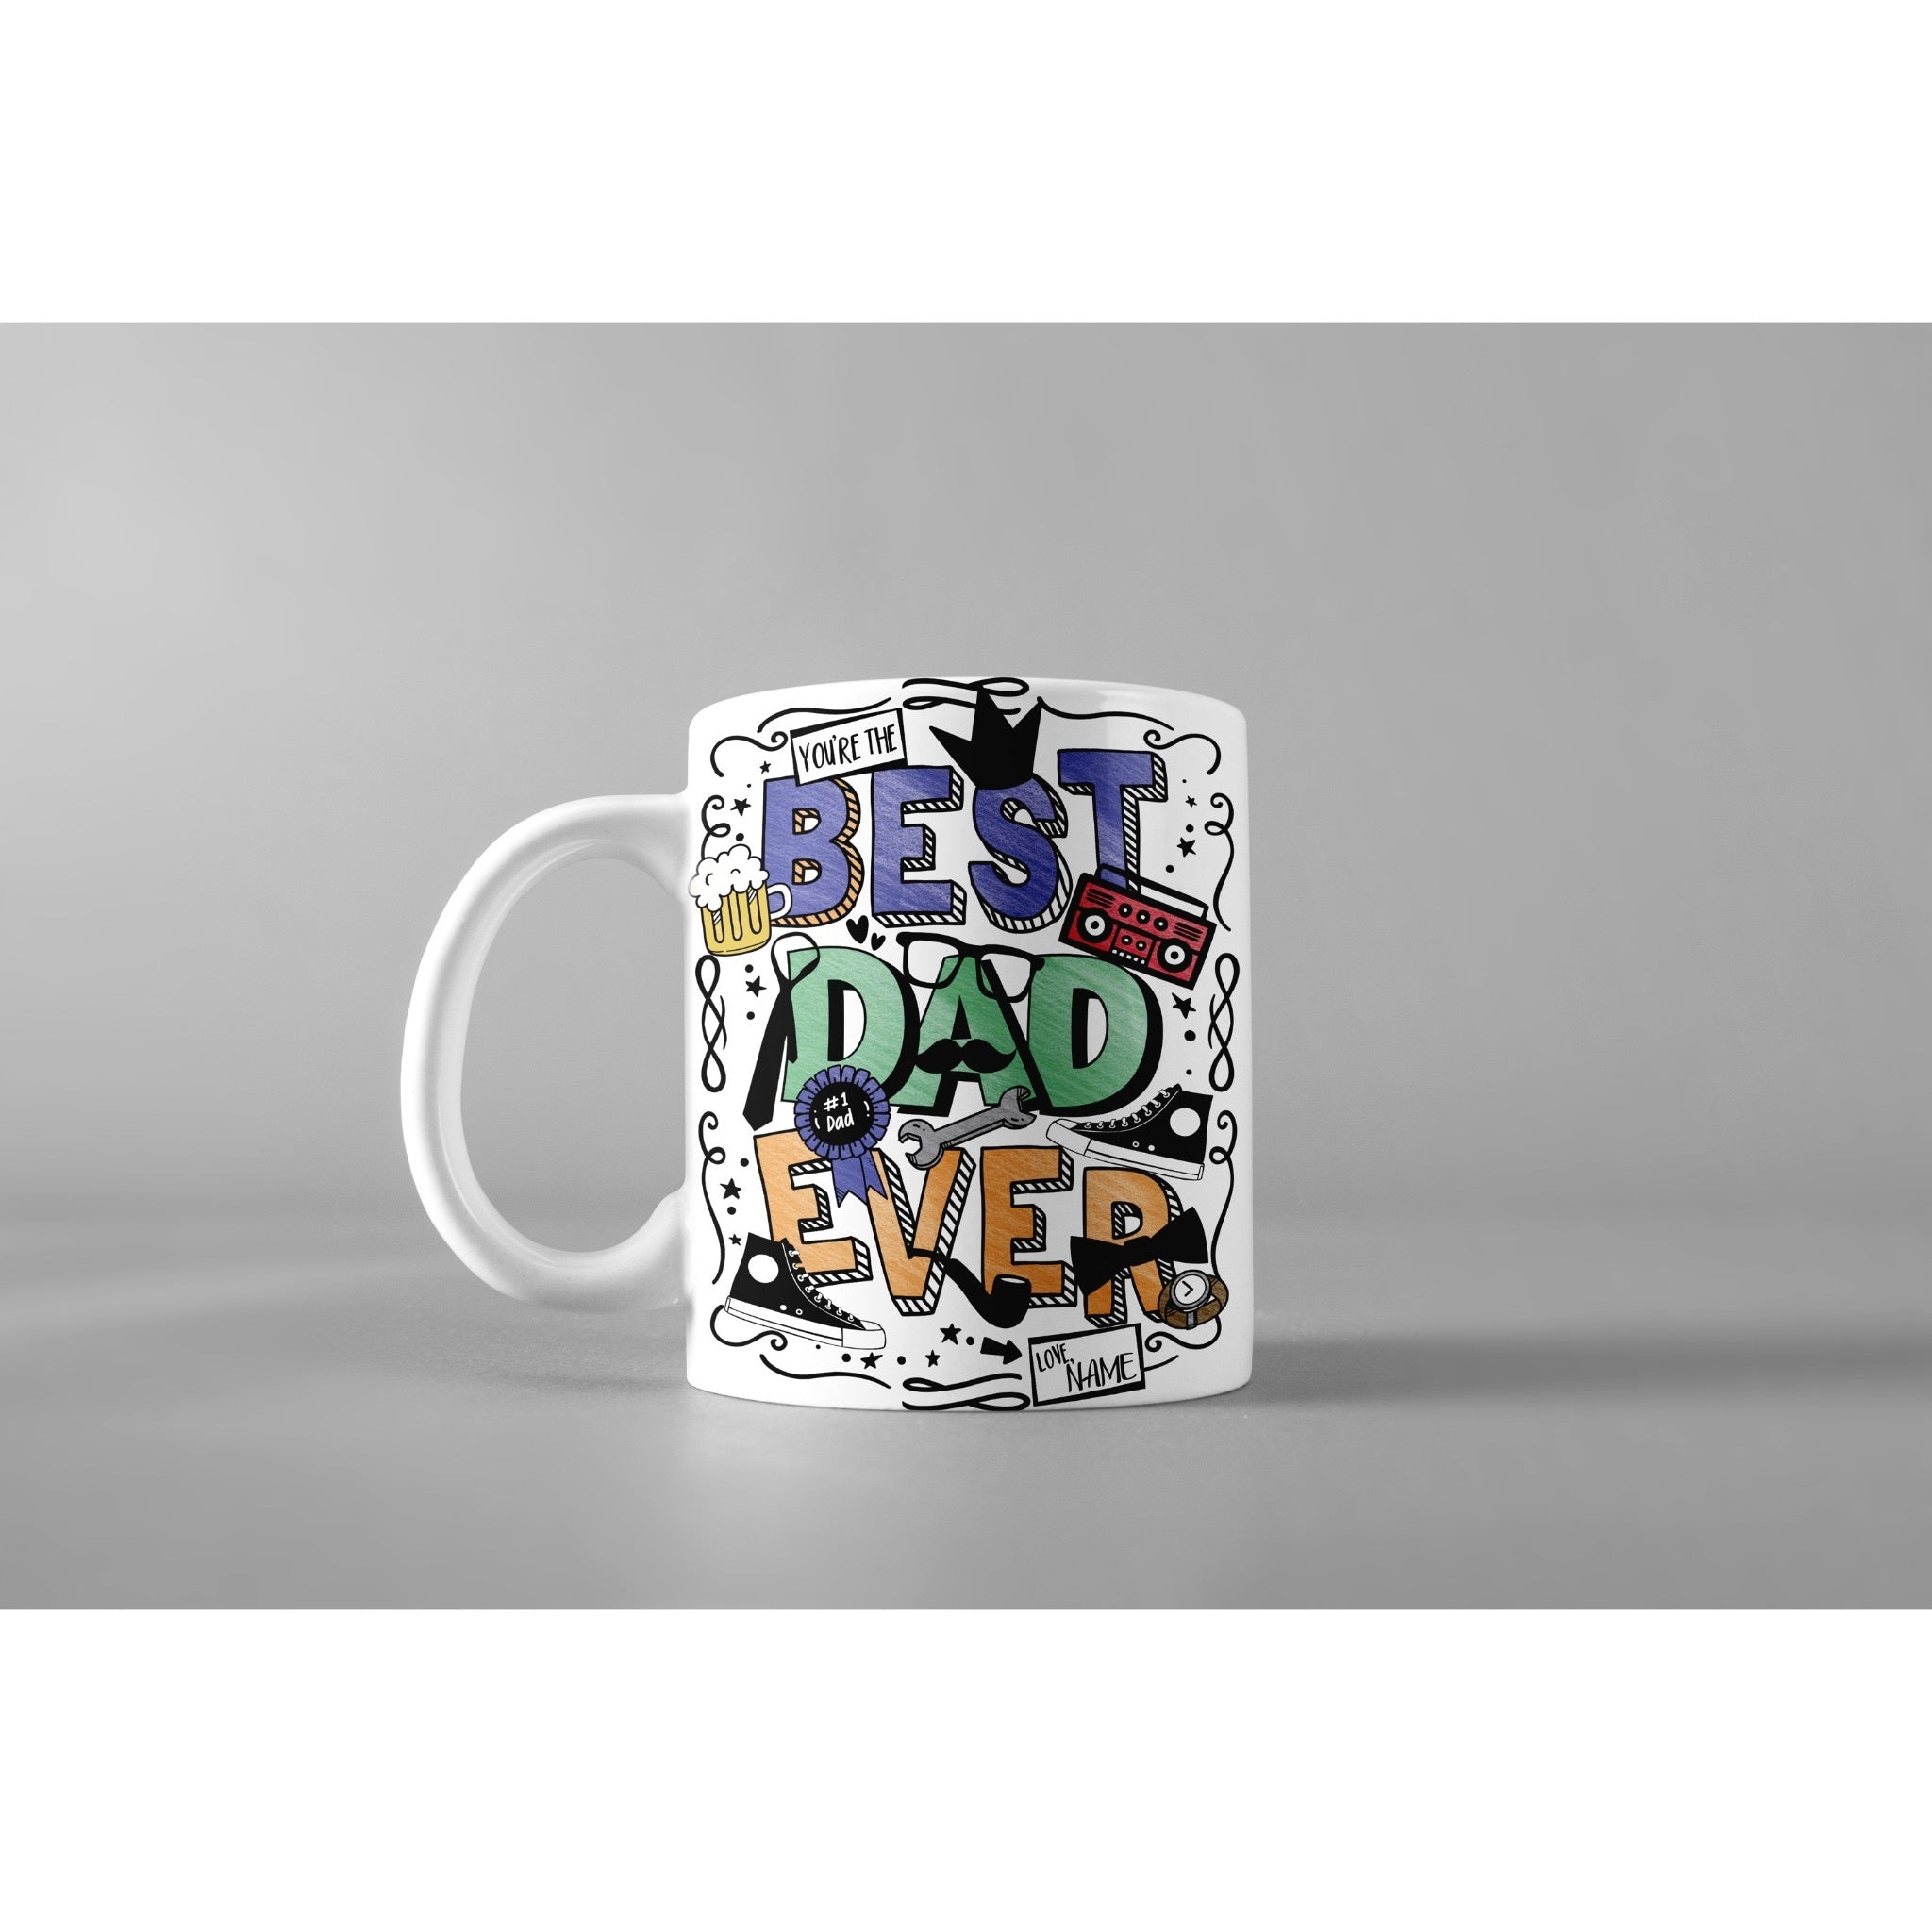 Best dad ever-- Mugs for Father